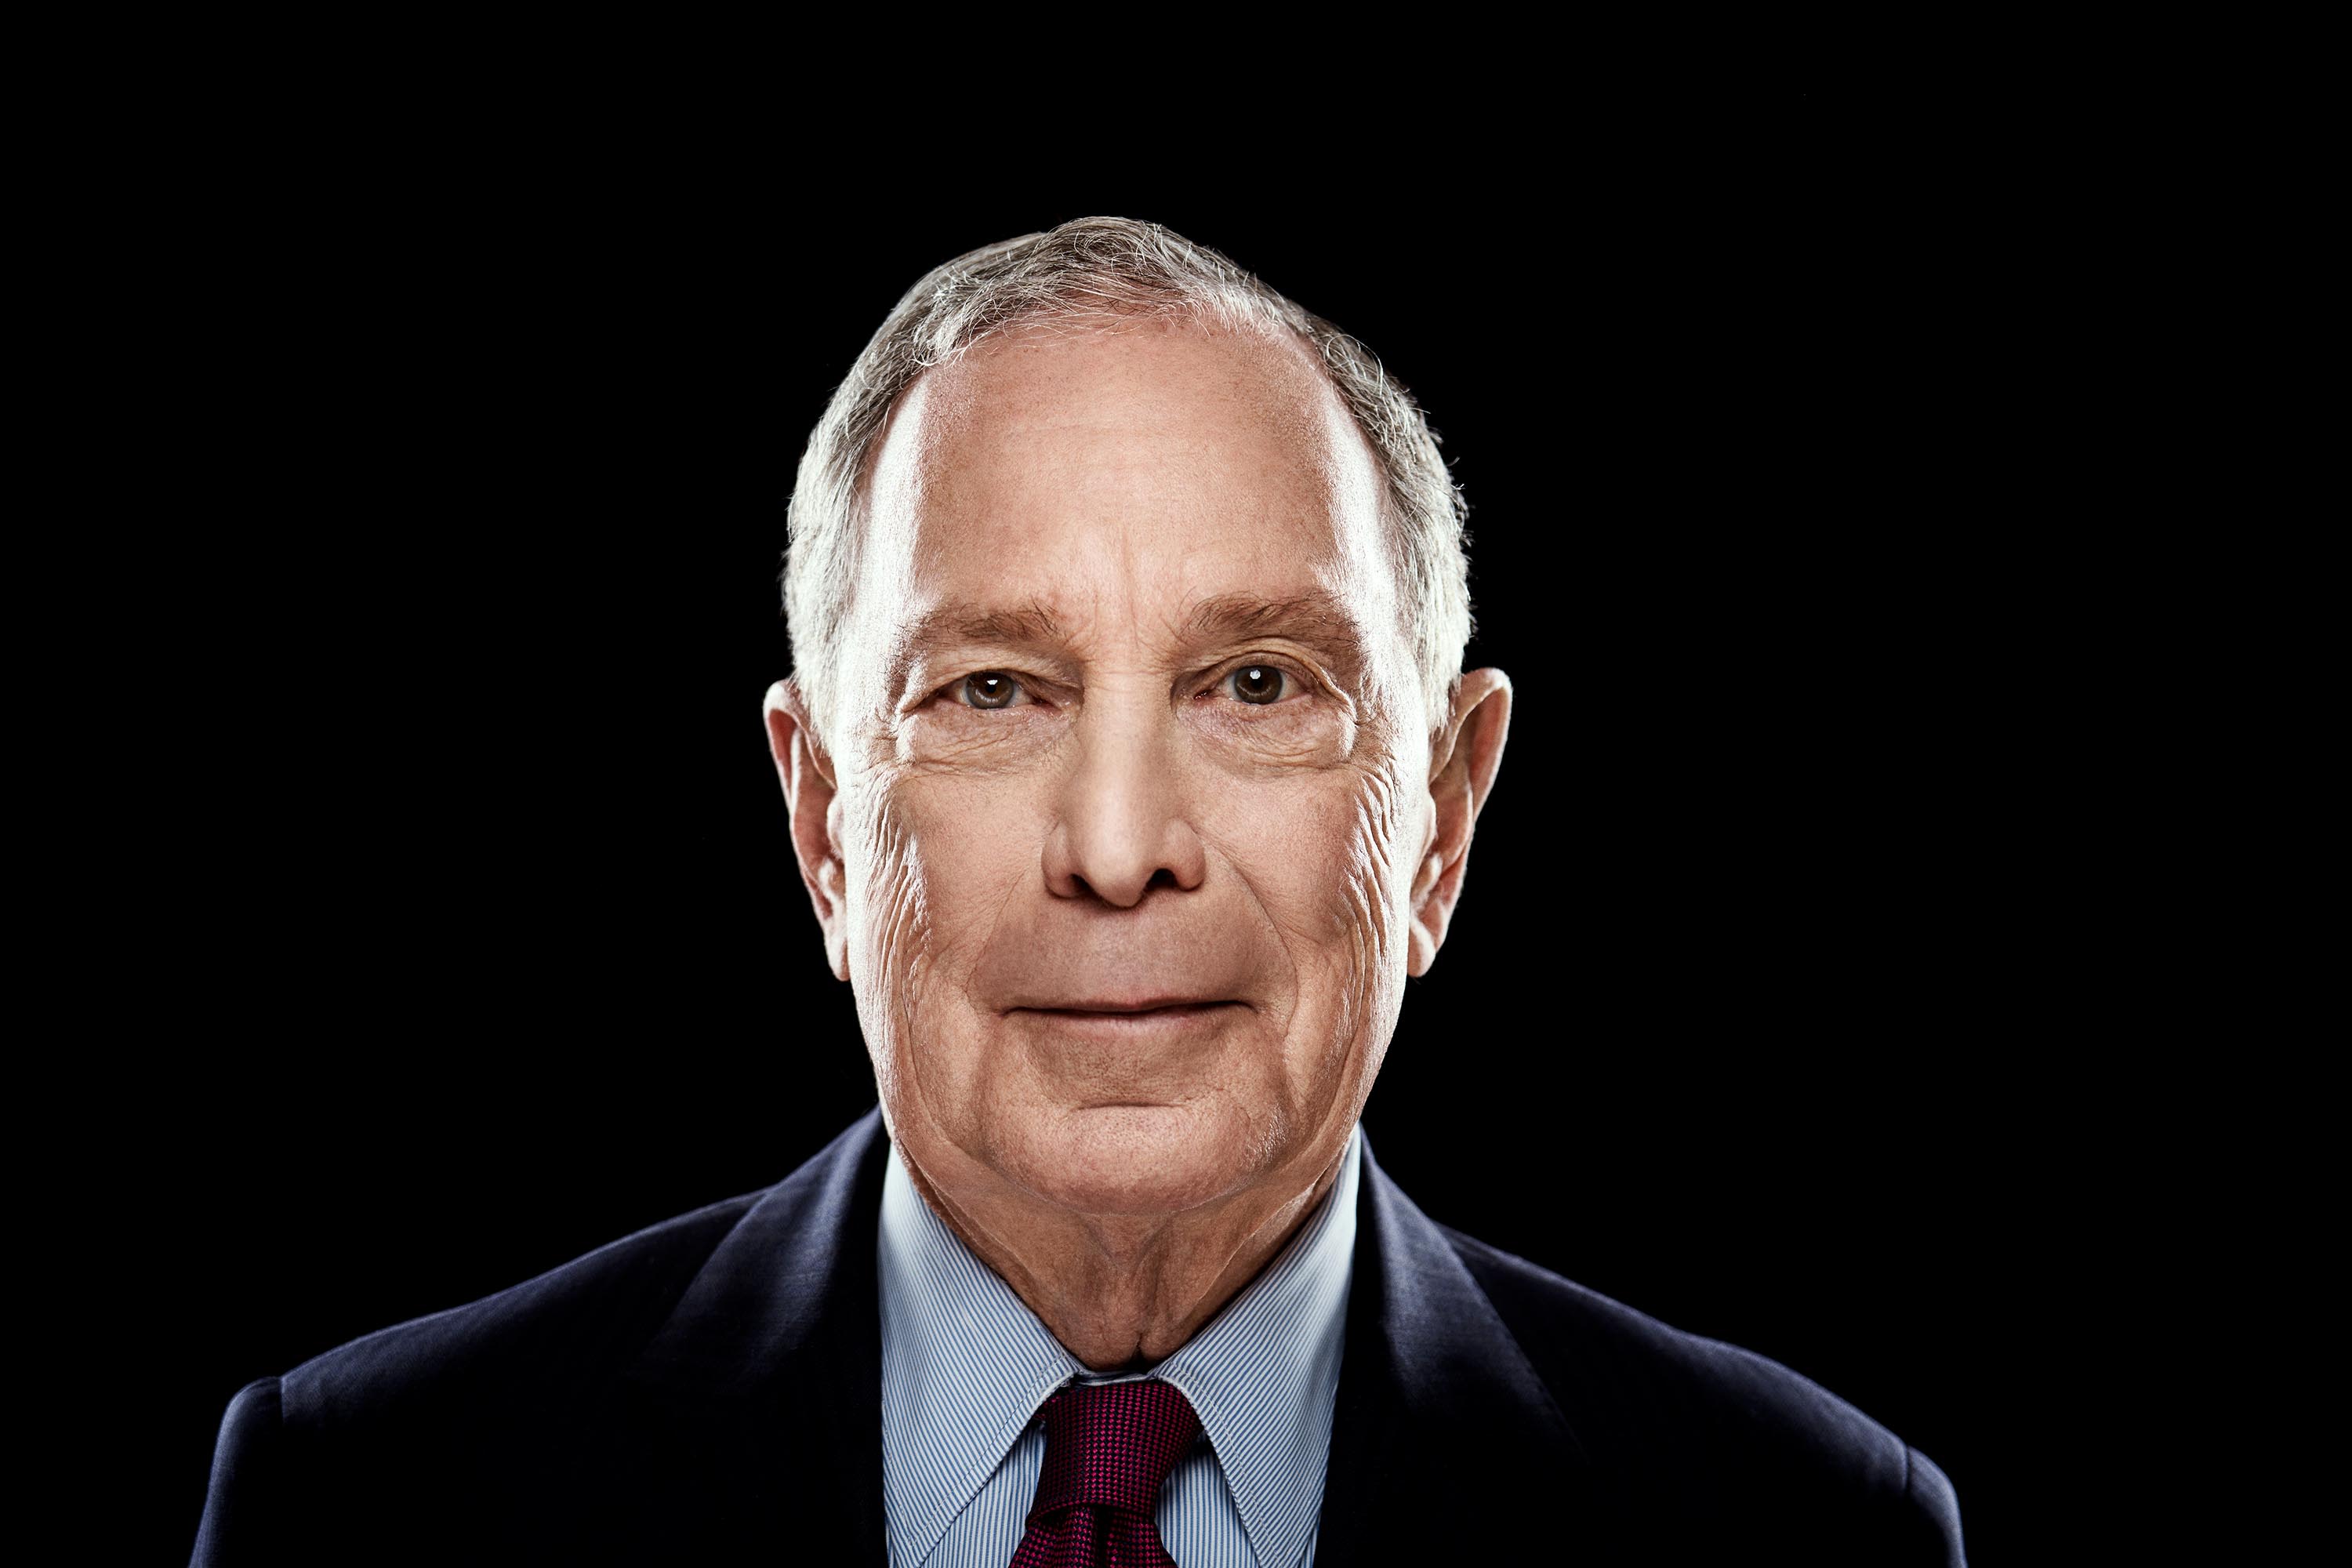 Michael Bloomberg Fast Facts | CNN